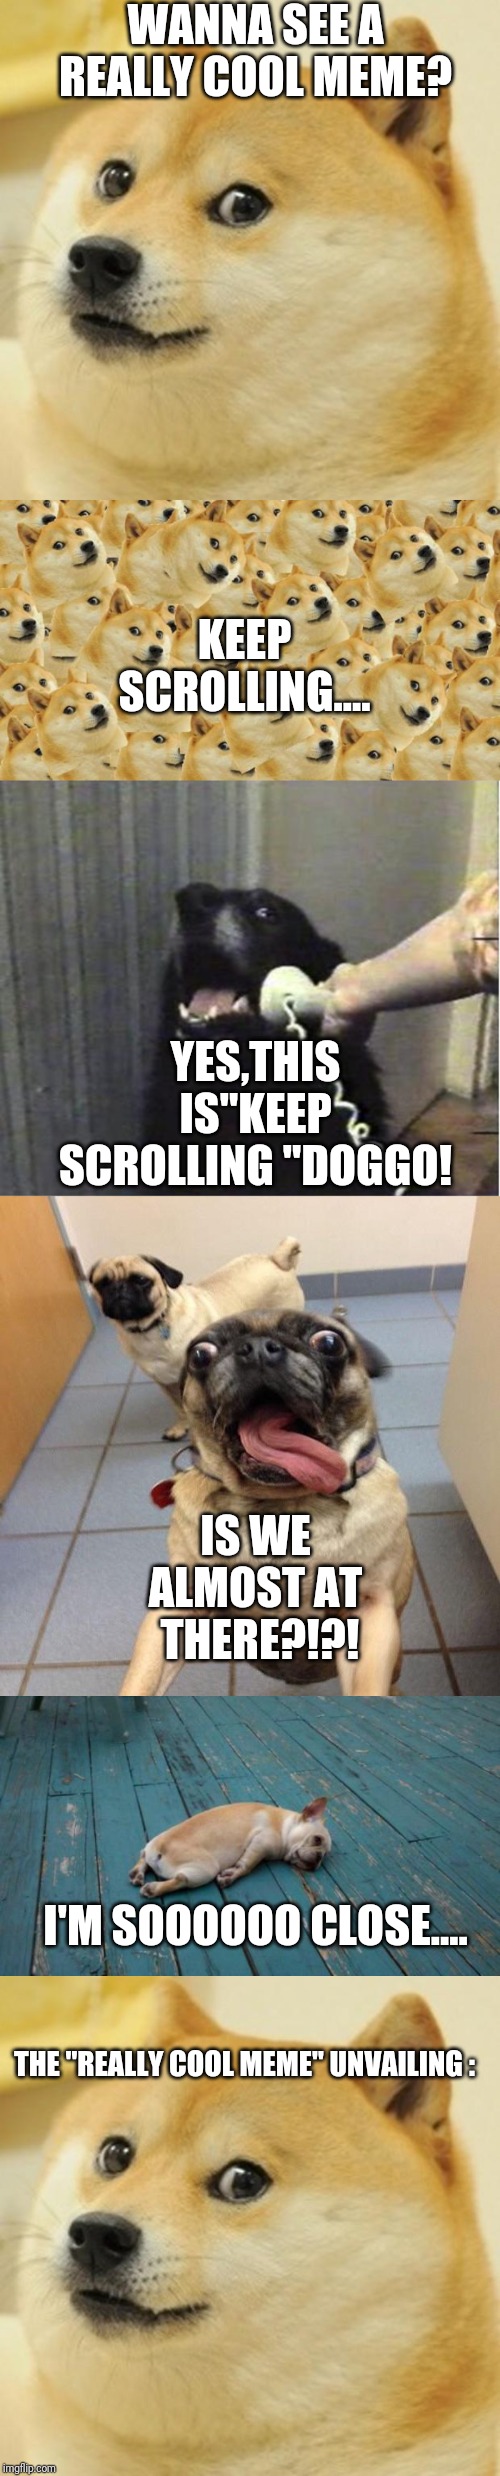 WANNA SEE A REALLY COOL MEME? KEEP SCROLLING.... YES,THIS IS"KEEP SCROLLING "DOGGO! IS WE ALMOST AT  THERE?!?! I'M SOOOOOO CLOSE.... THE "REALLY COOL MEME" UNVAILING : | image tagged in yes this is dog,memes,multi doge,doge,tired dog,excited dog | made w/ Imgflip meme maker